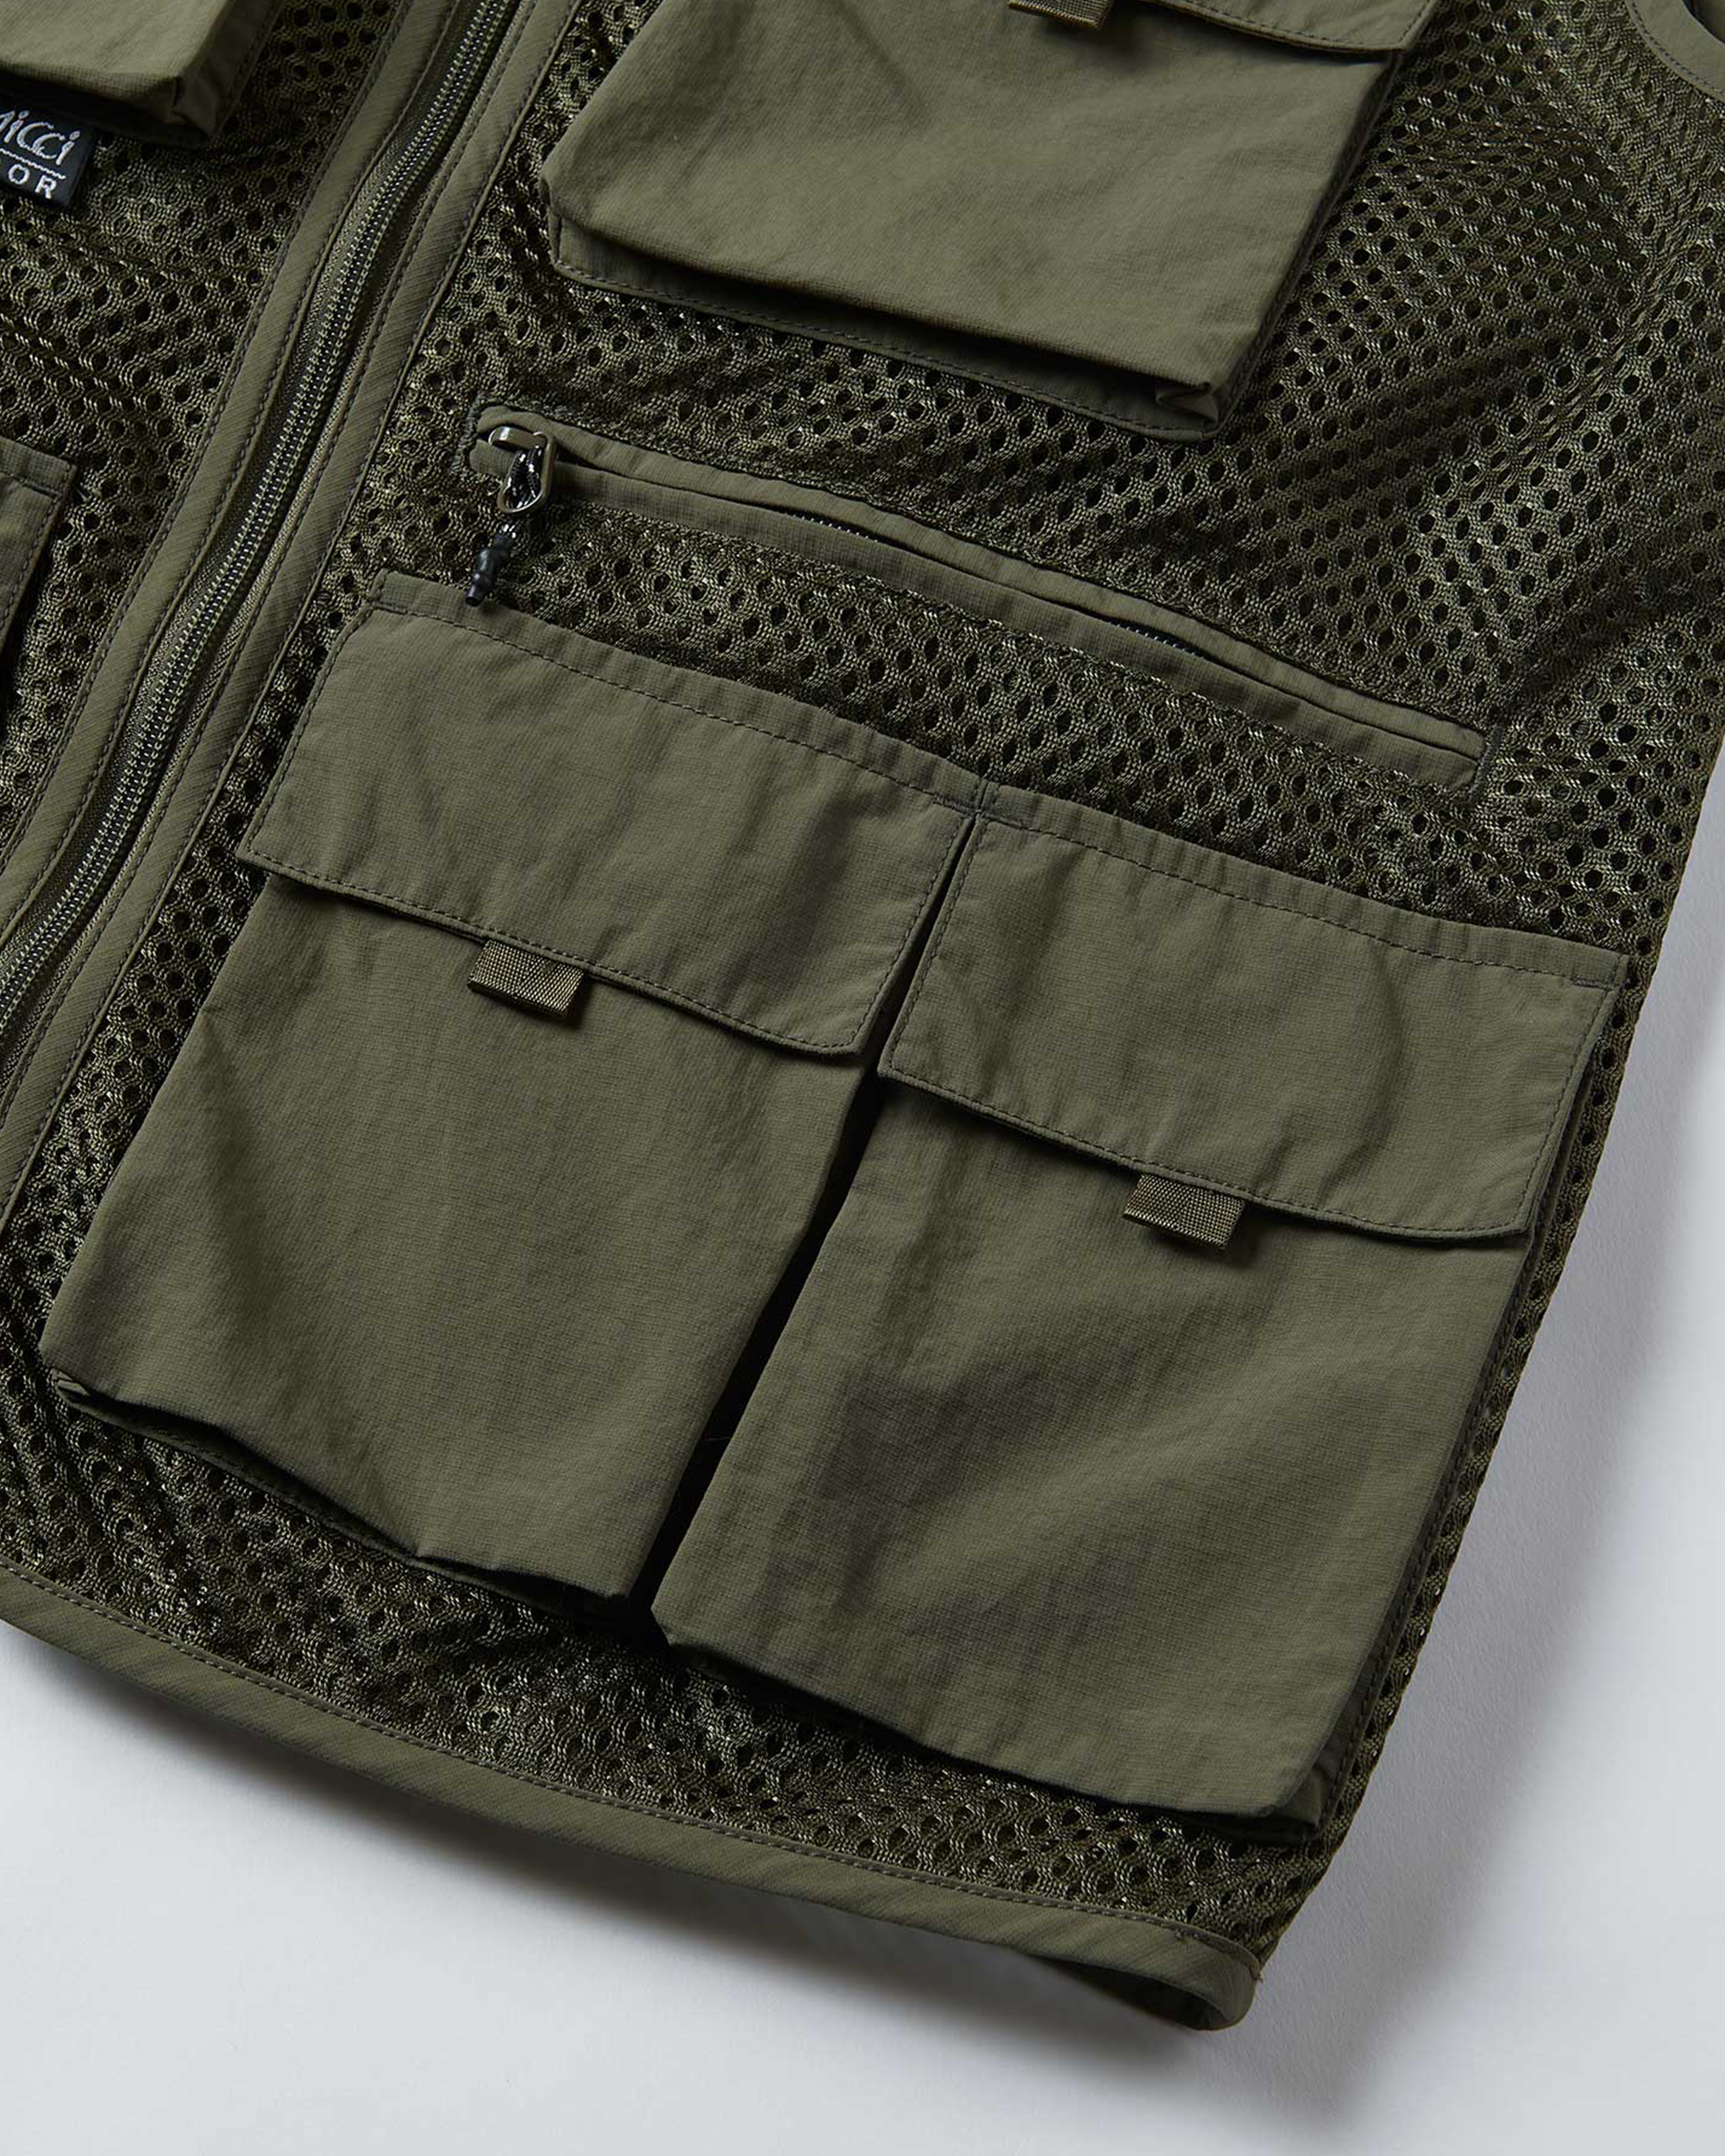 Gone Fishing Vest - Army Green